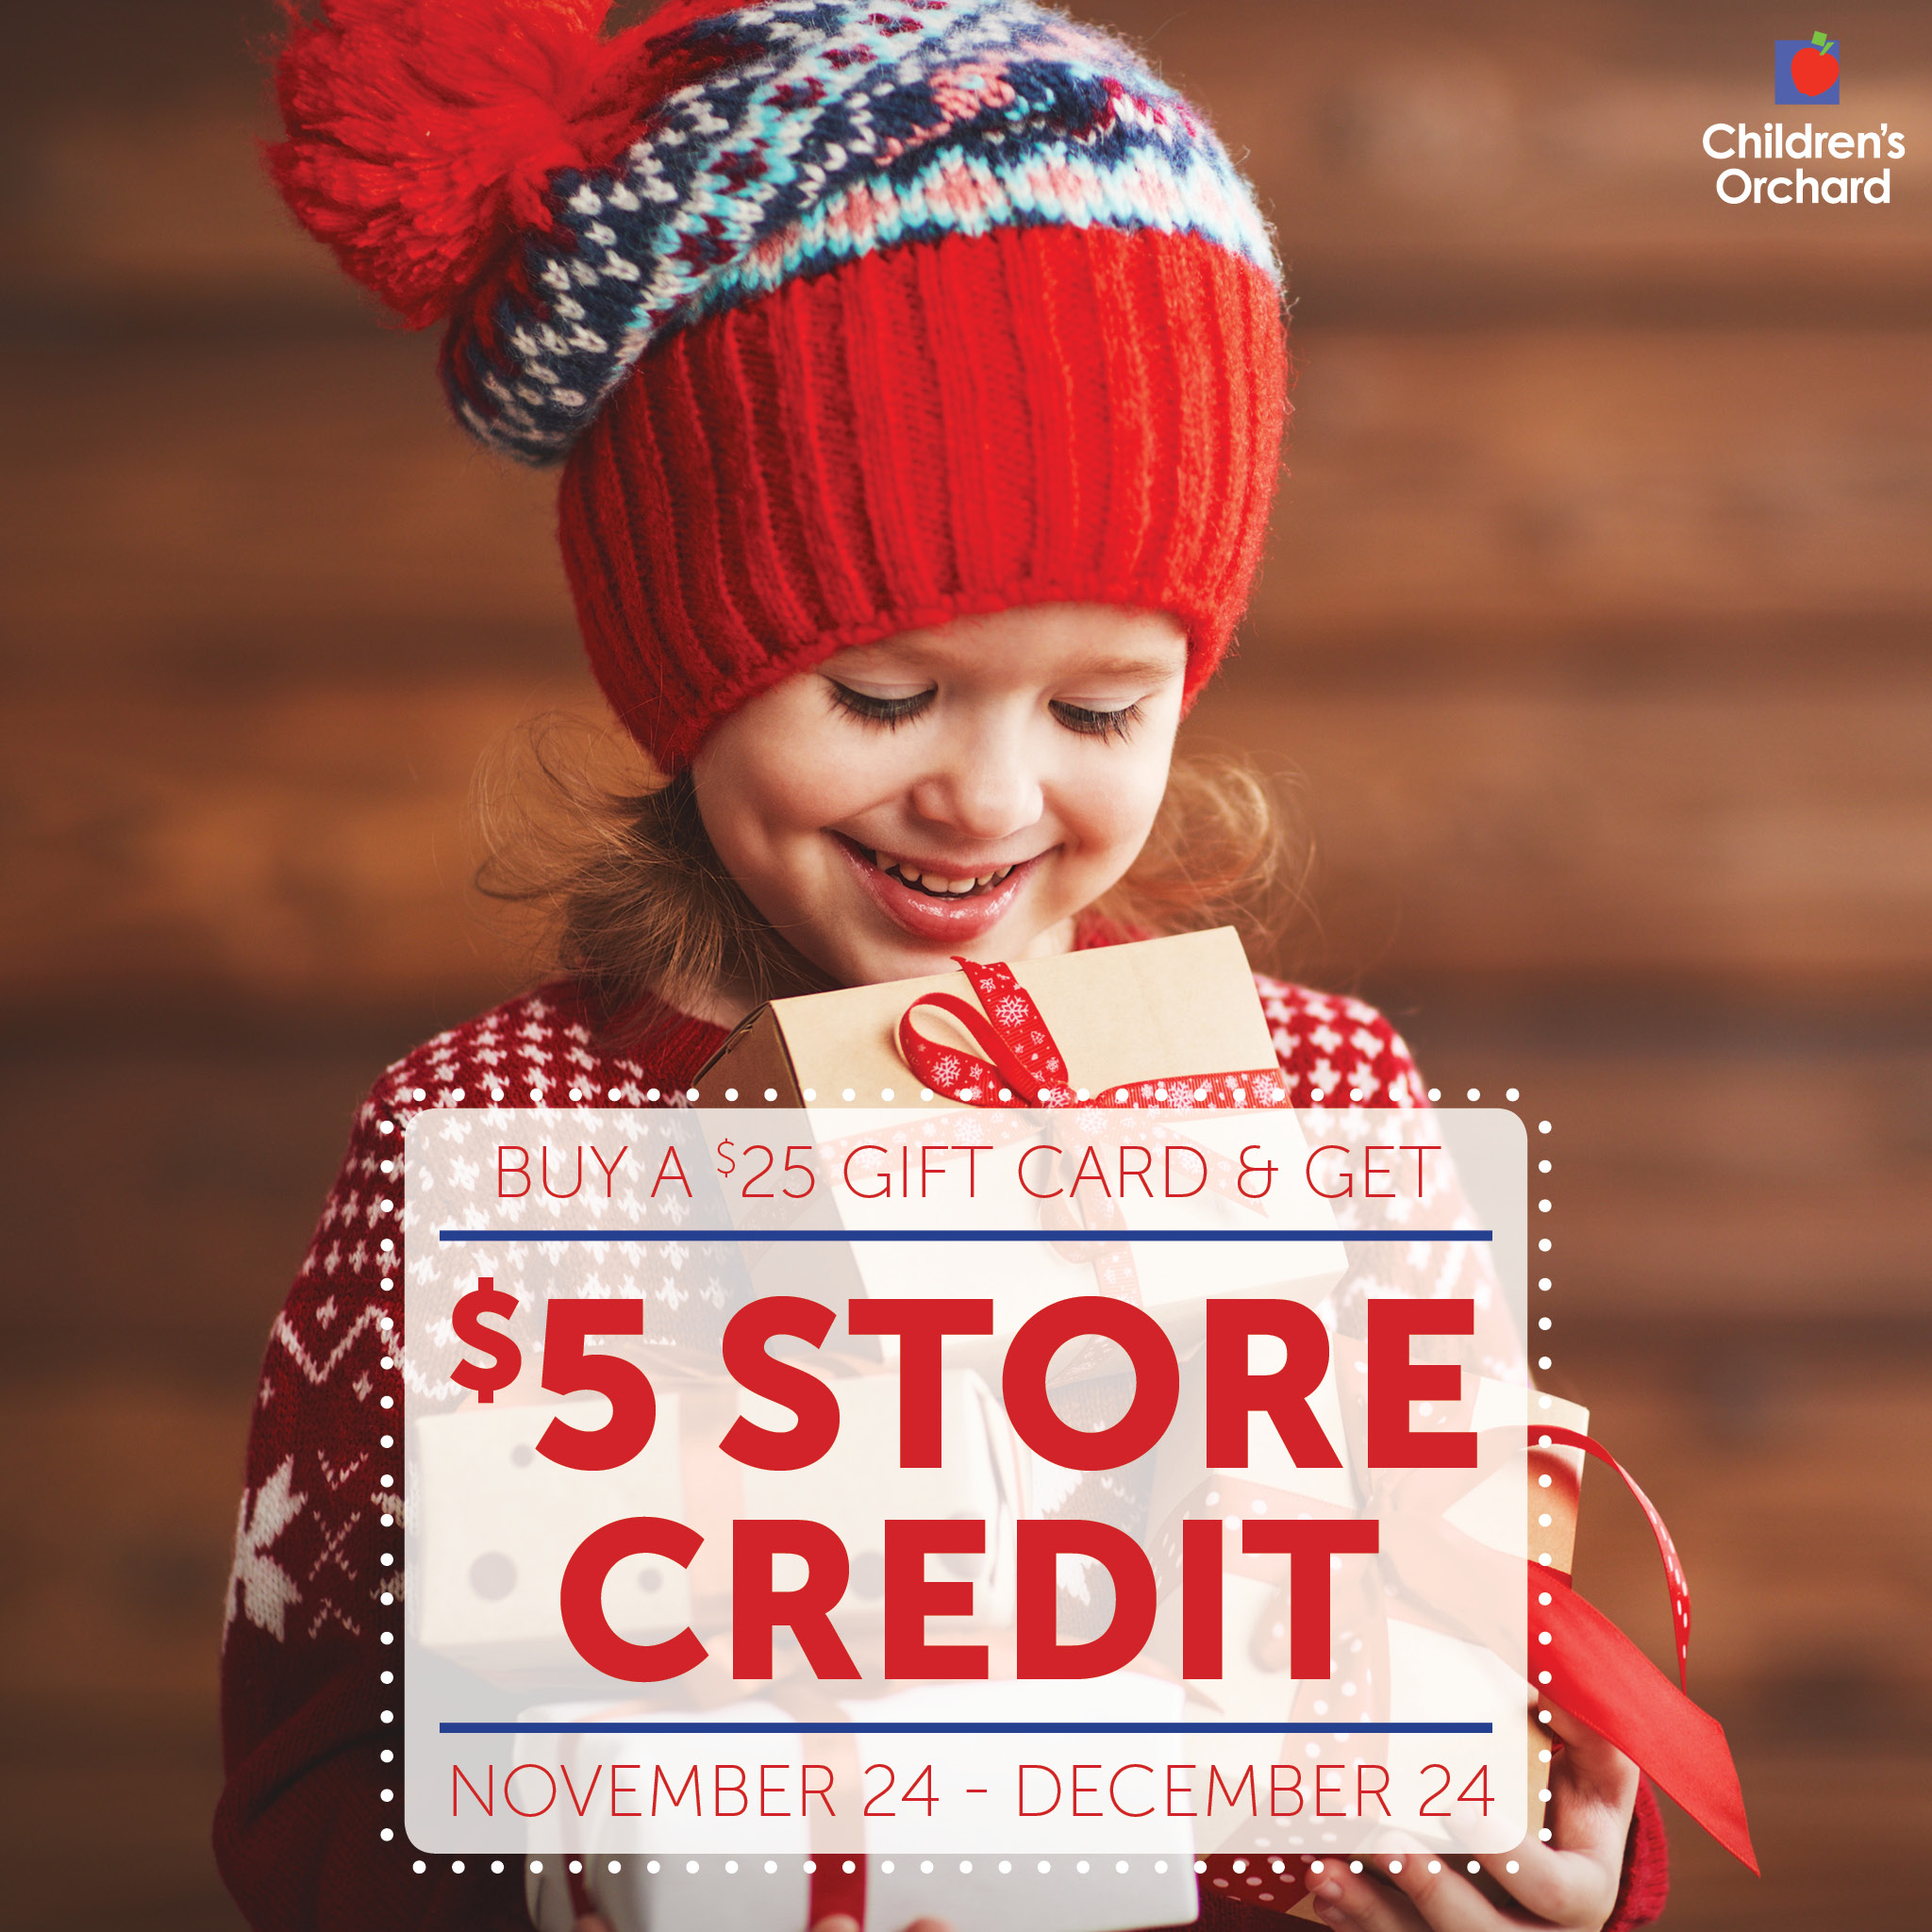 Buy a $25 gift card & get $5 store credit November 24 - December 24. Little girl in knit sweater and hat holding gifts.